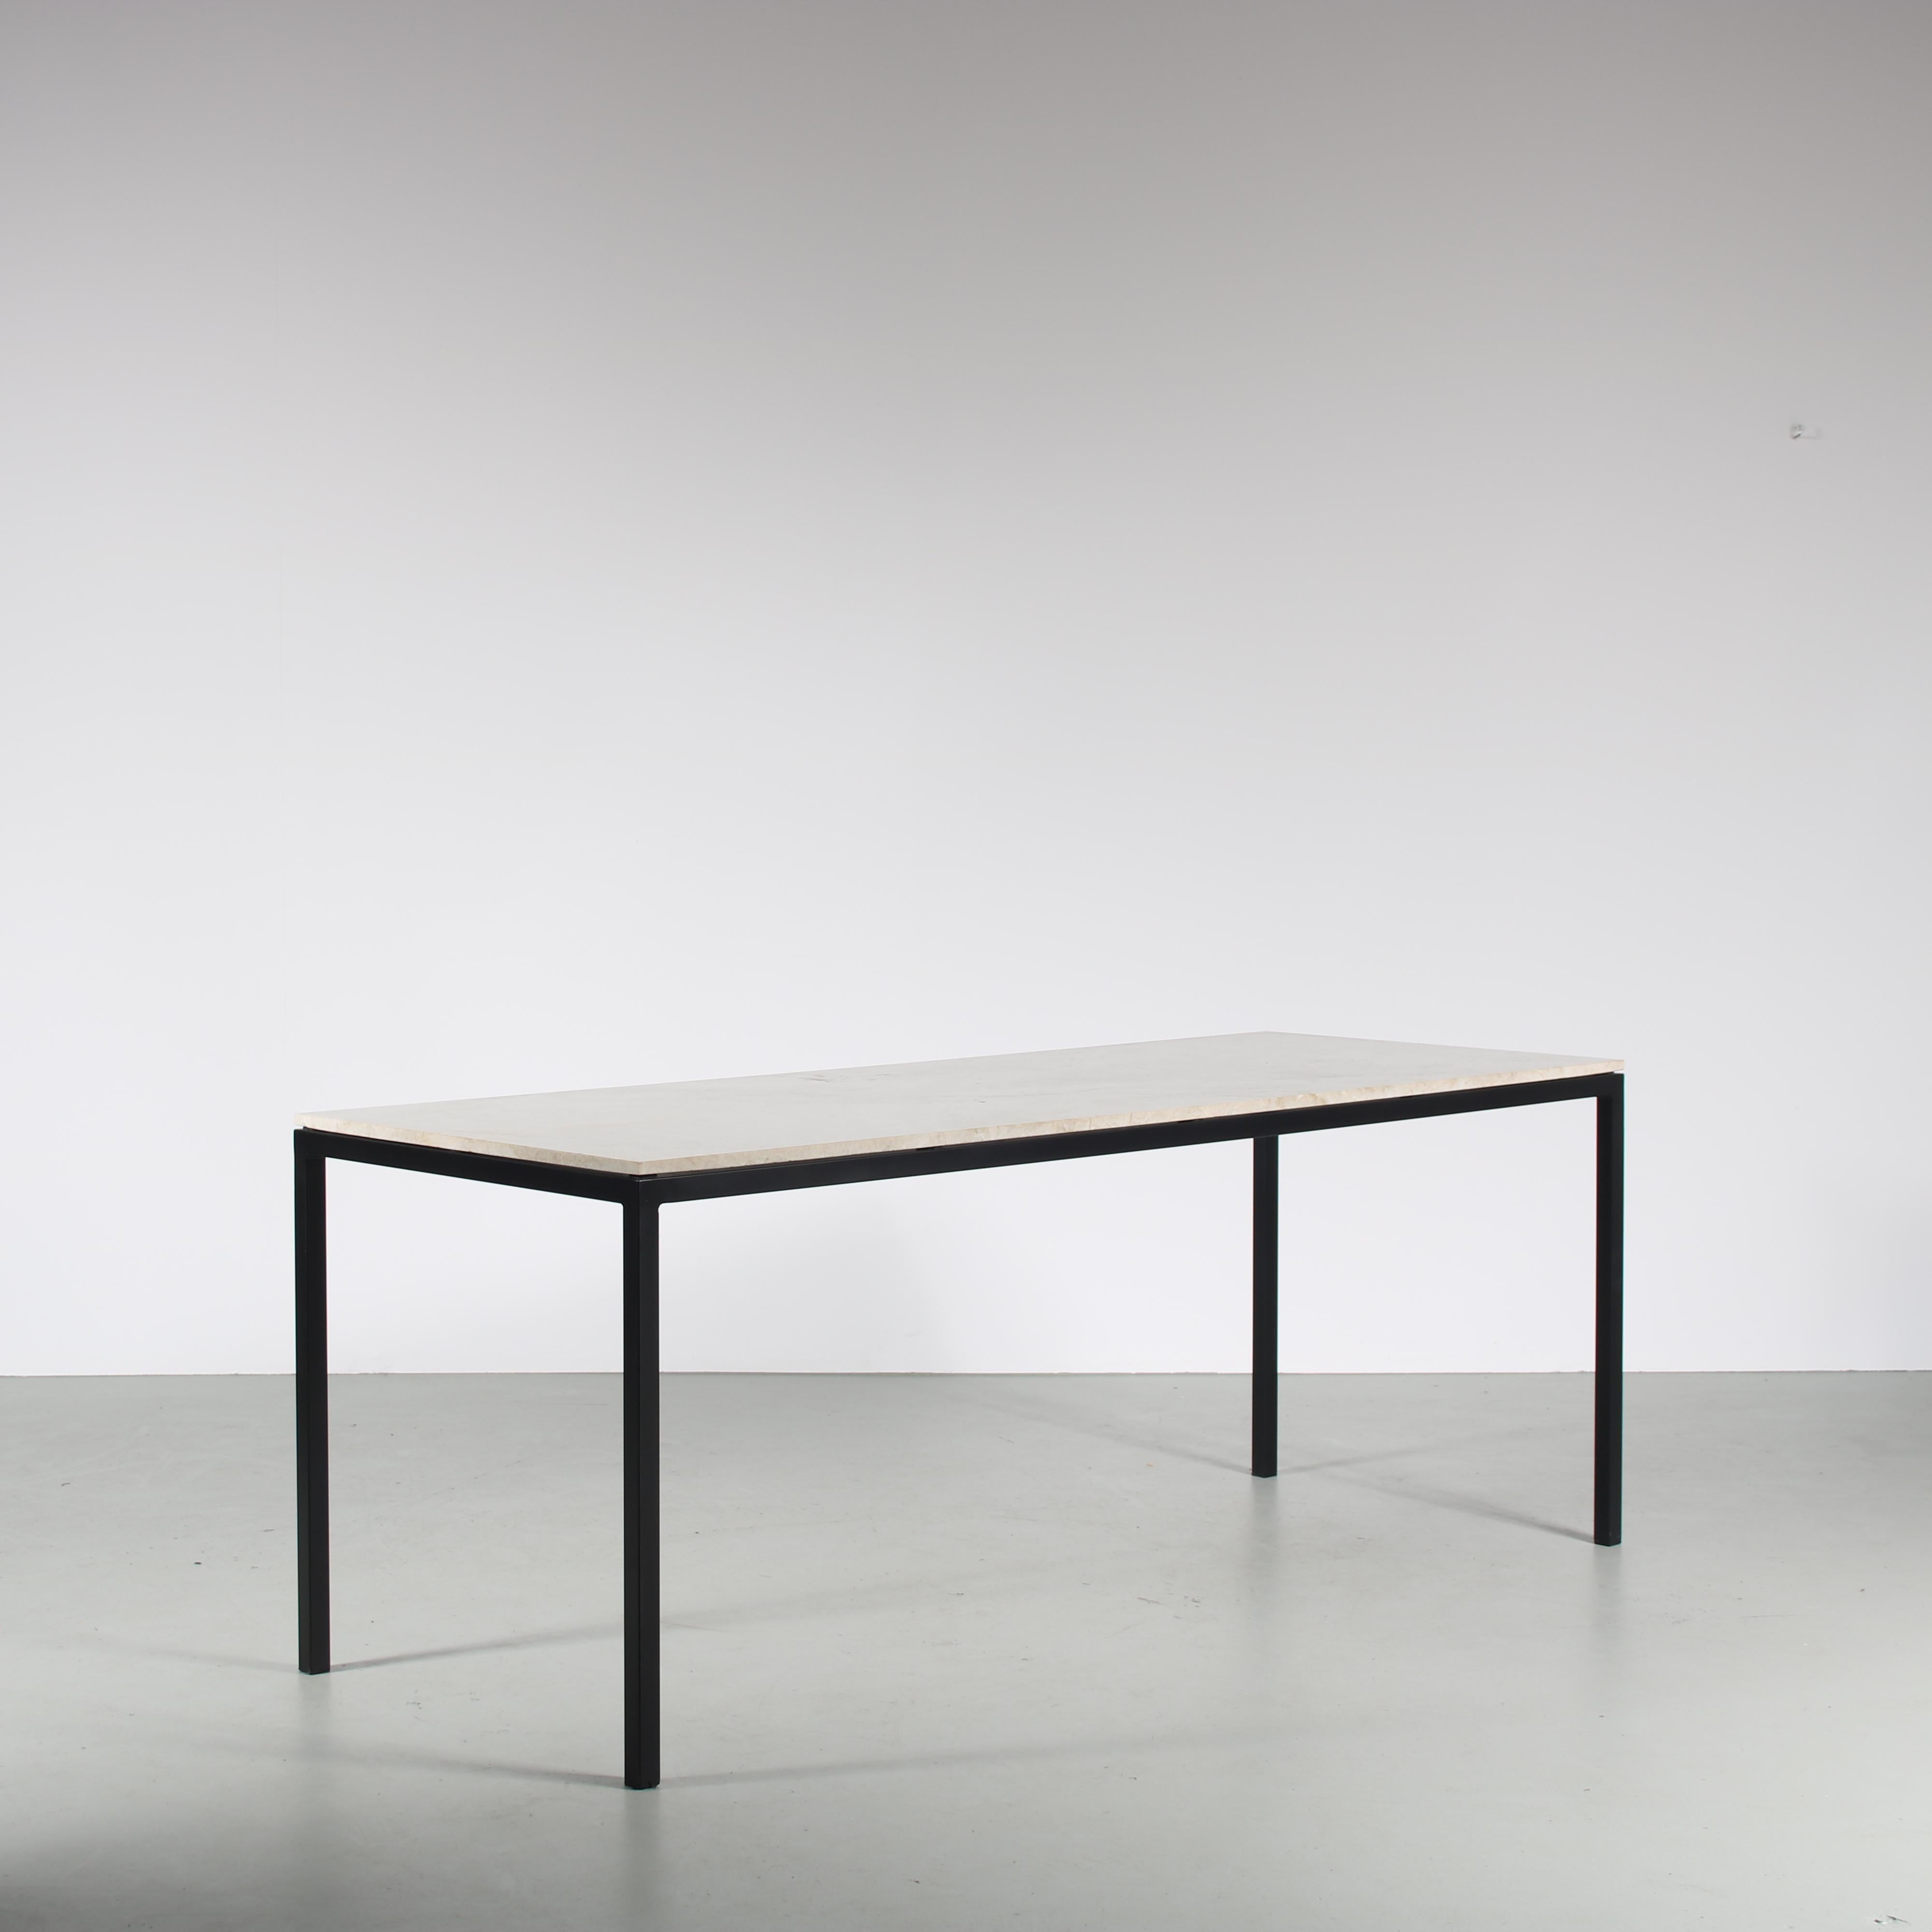 A luxurious, modern dining table in the style of Florence Knoll, manufactured around 1950.

The piece has a minimalist design with rectangular, black lacquered metal base and a beautiful quality marble top. This combines into a very luxurious